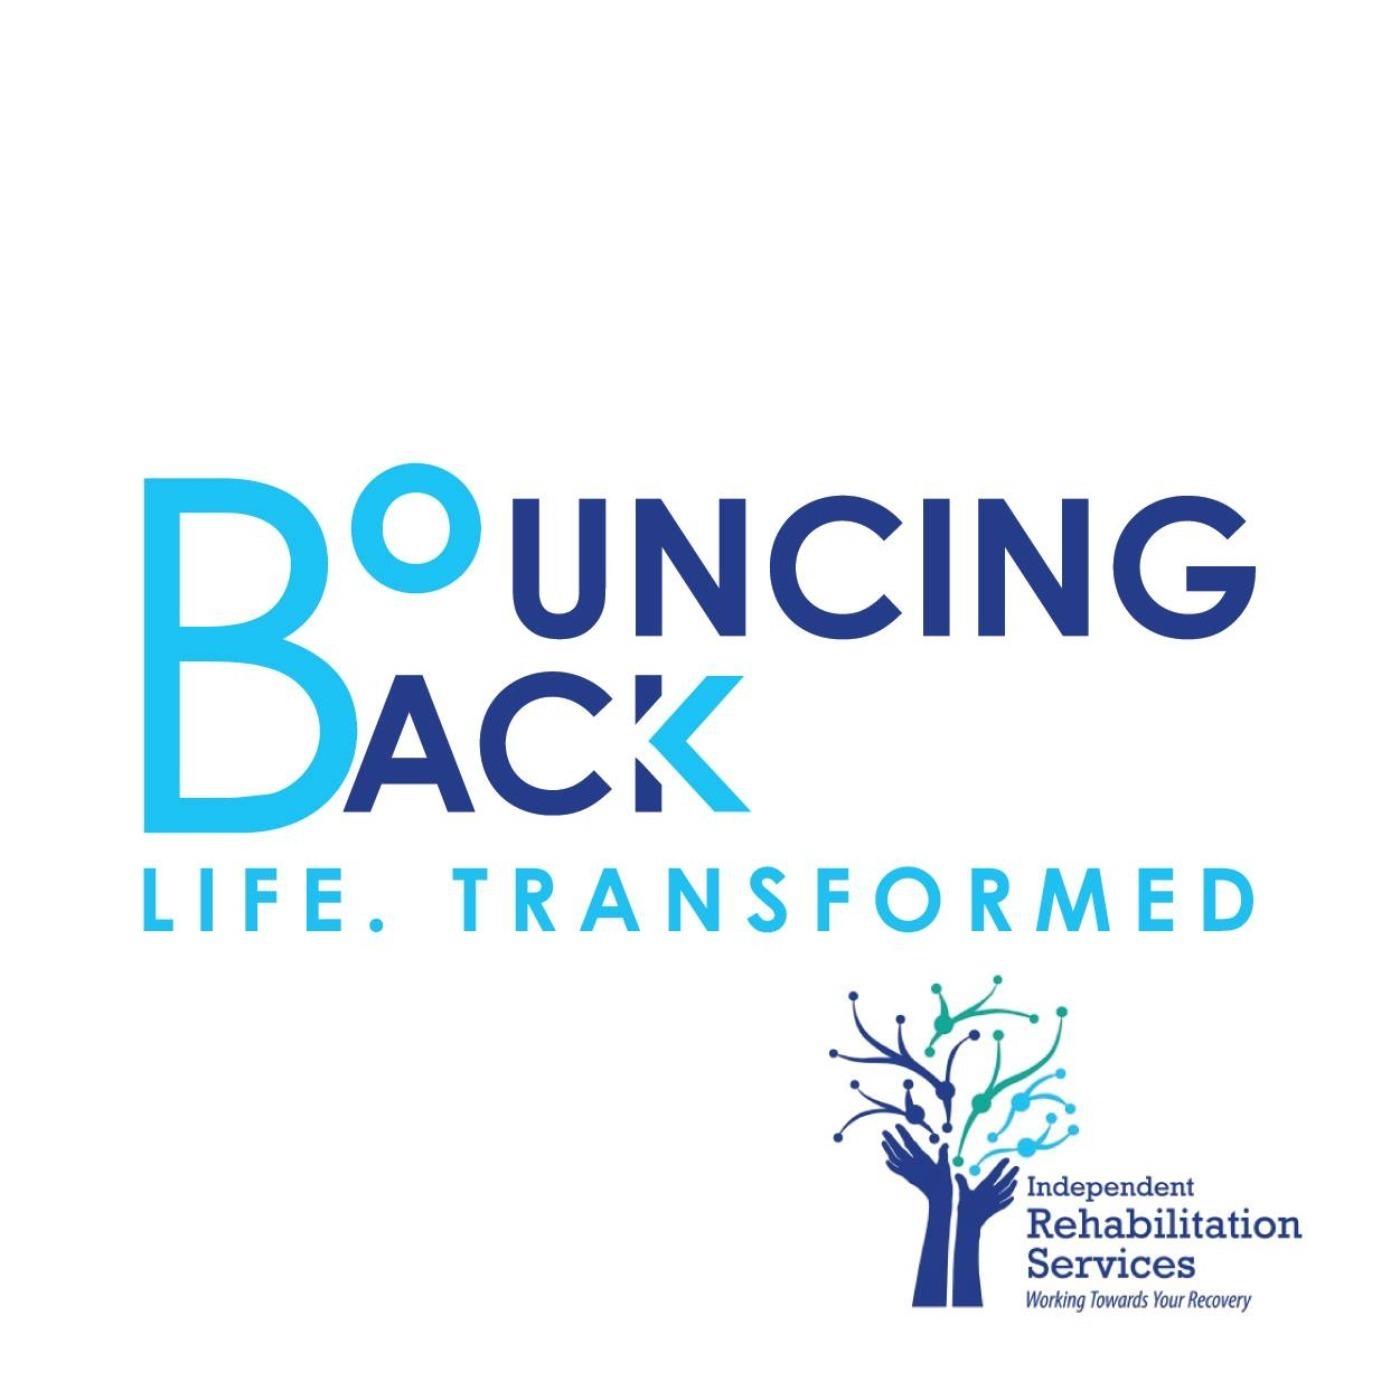 Bouncing Back with Independent Rehabilitation Services